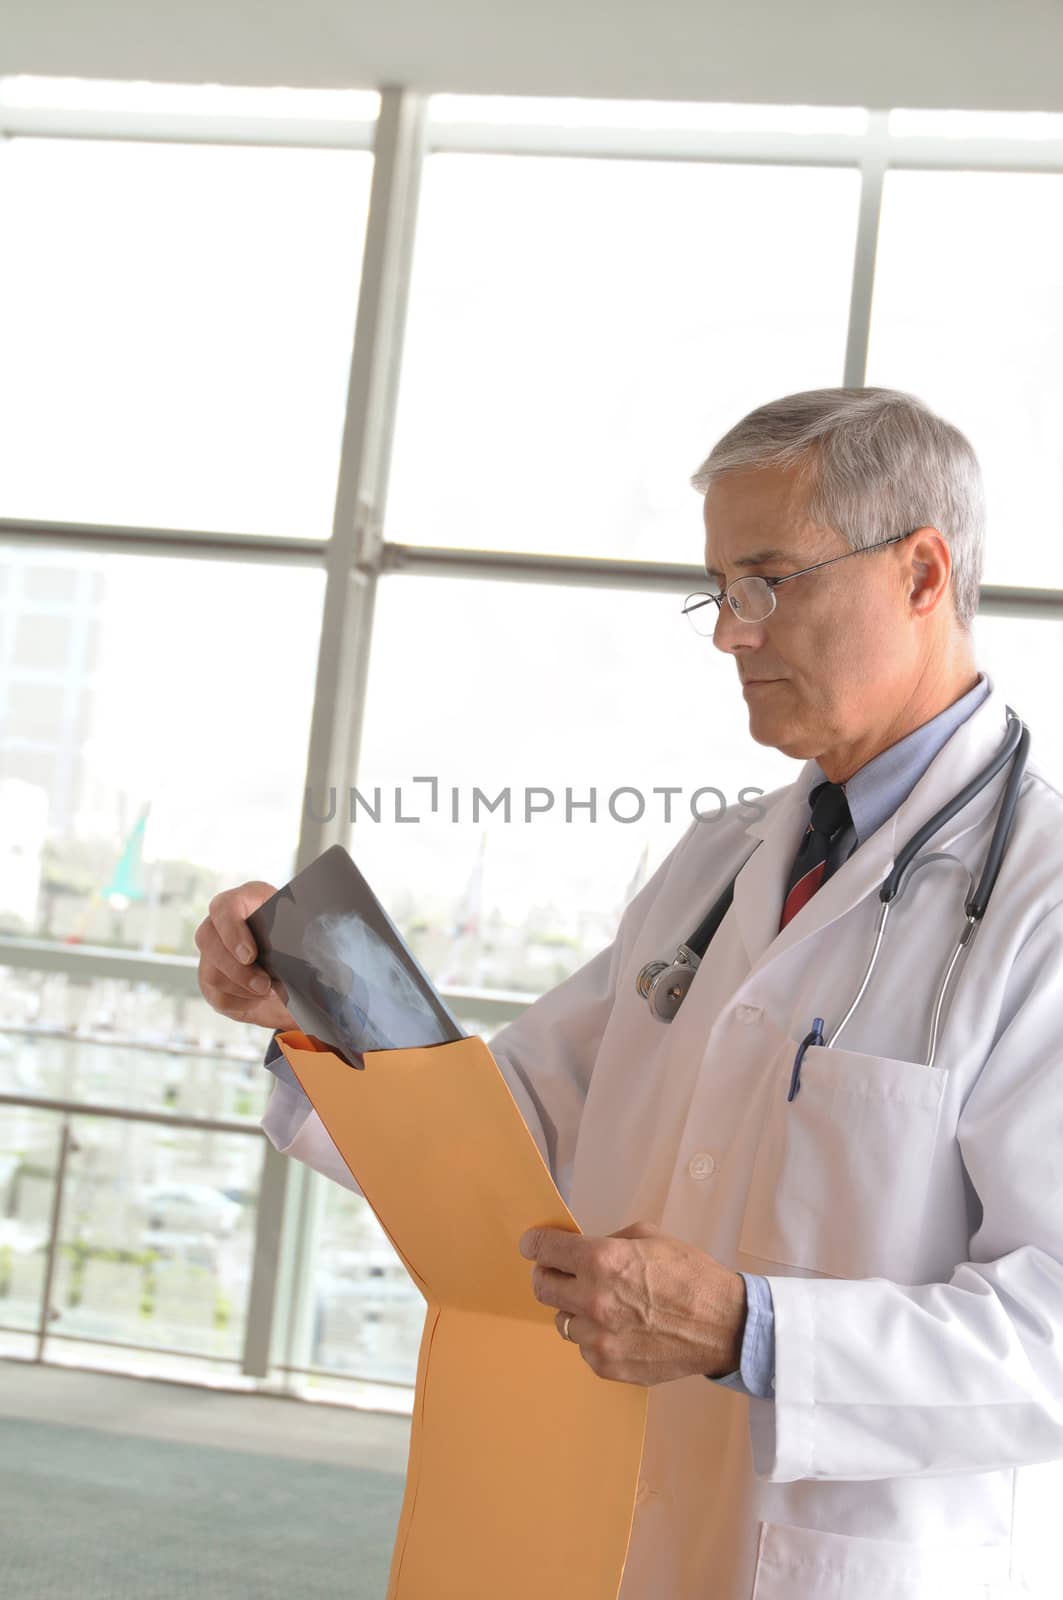 Middle aged doctor in modern medical facility by sCukrov